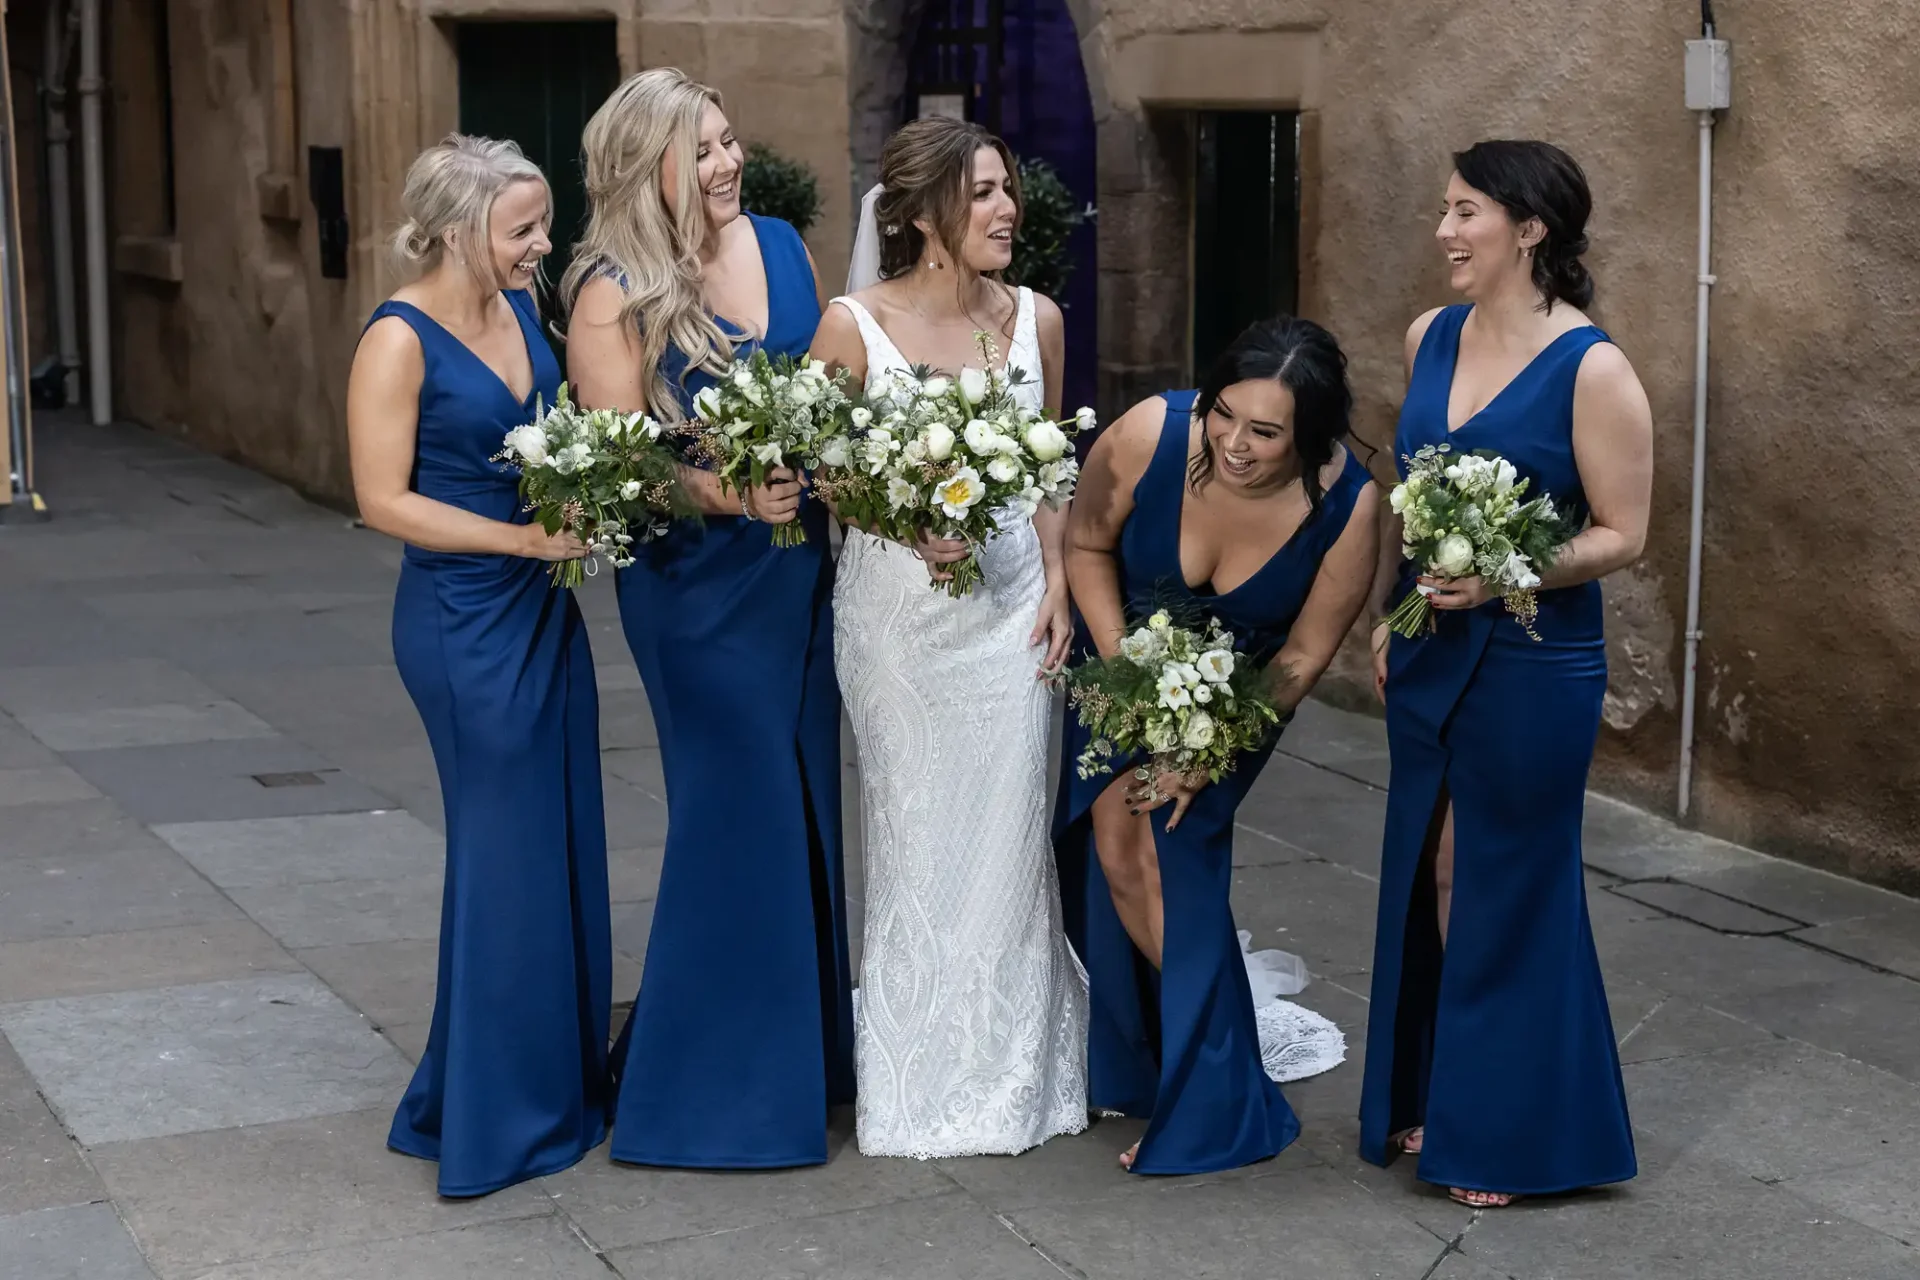 A bride and her bridesmaids, all in blue dresses and holding bouquets, laugh together on a city street.